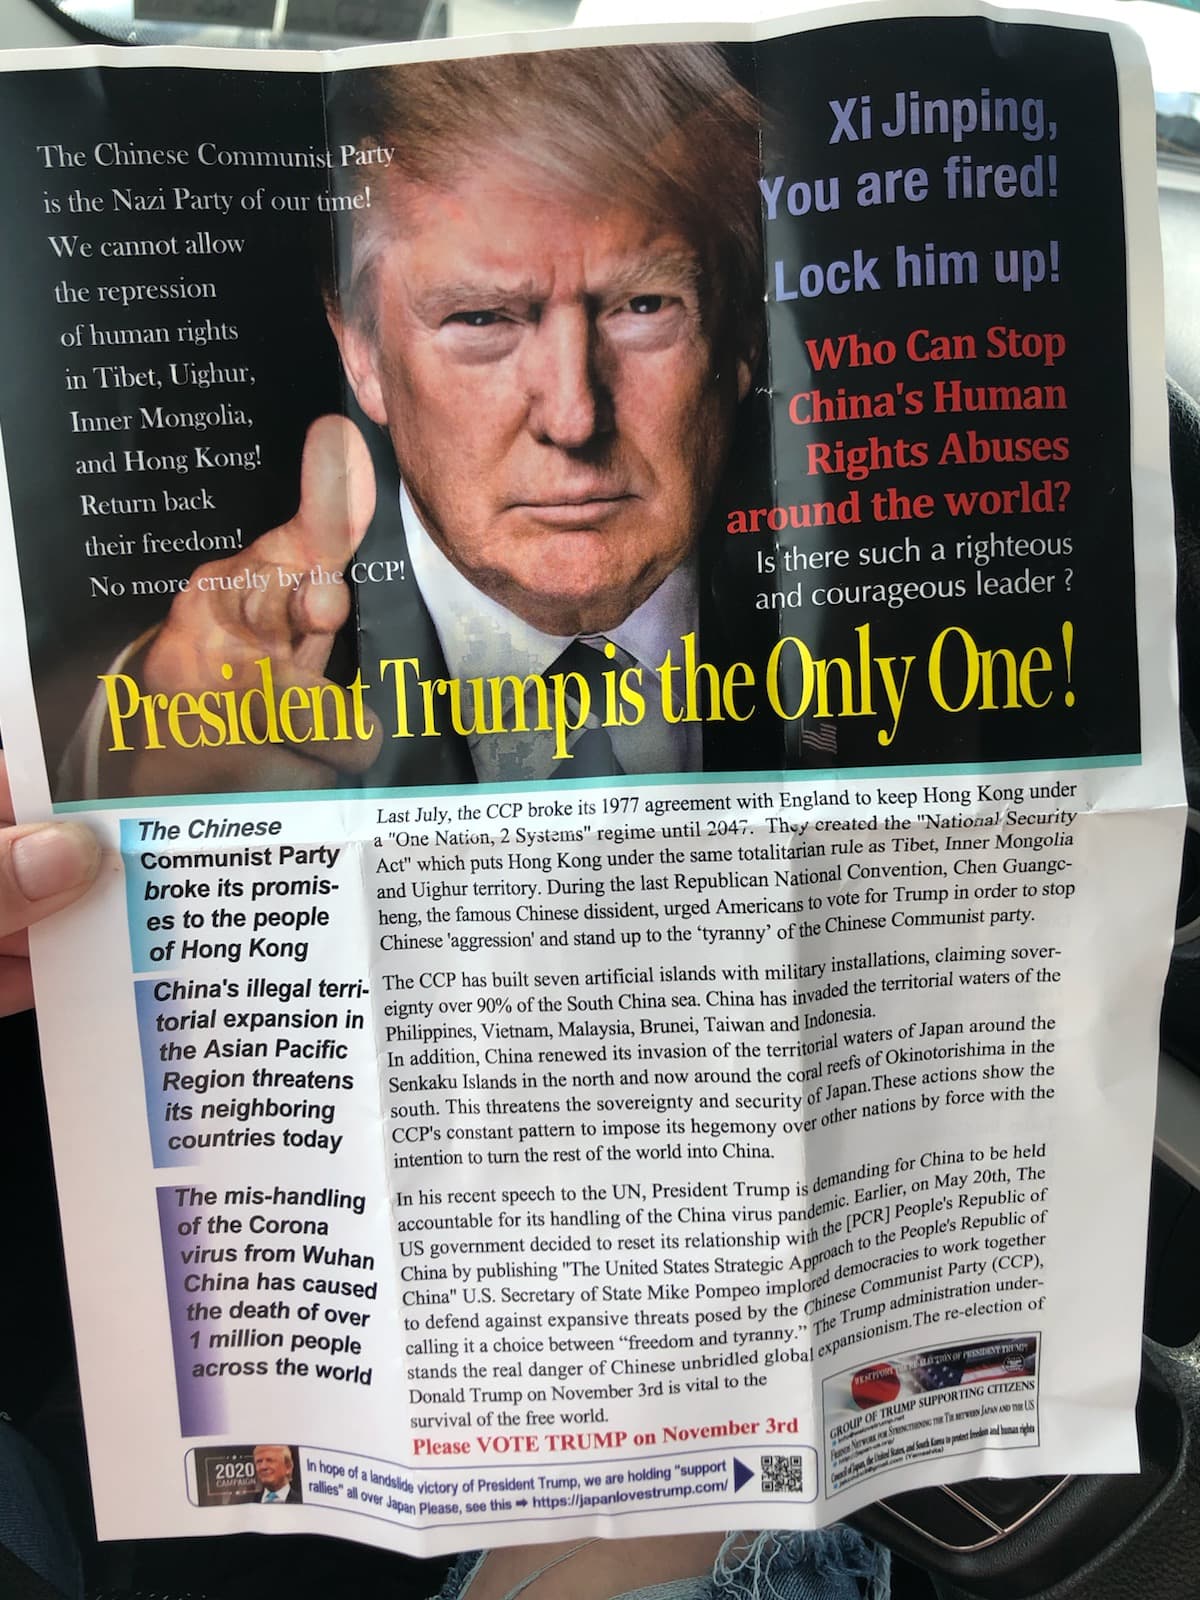 Pennsylvania citizens began receiving flyers handed out by Sean Moon's Sanctuary Church comparing China to Nazi Germany which were later shared over messaging apps and social media. (Provided to The Daily Caller News Foundation)